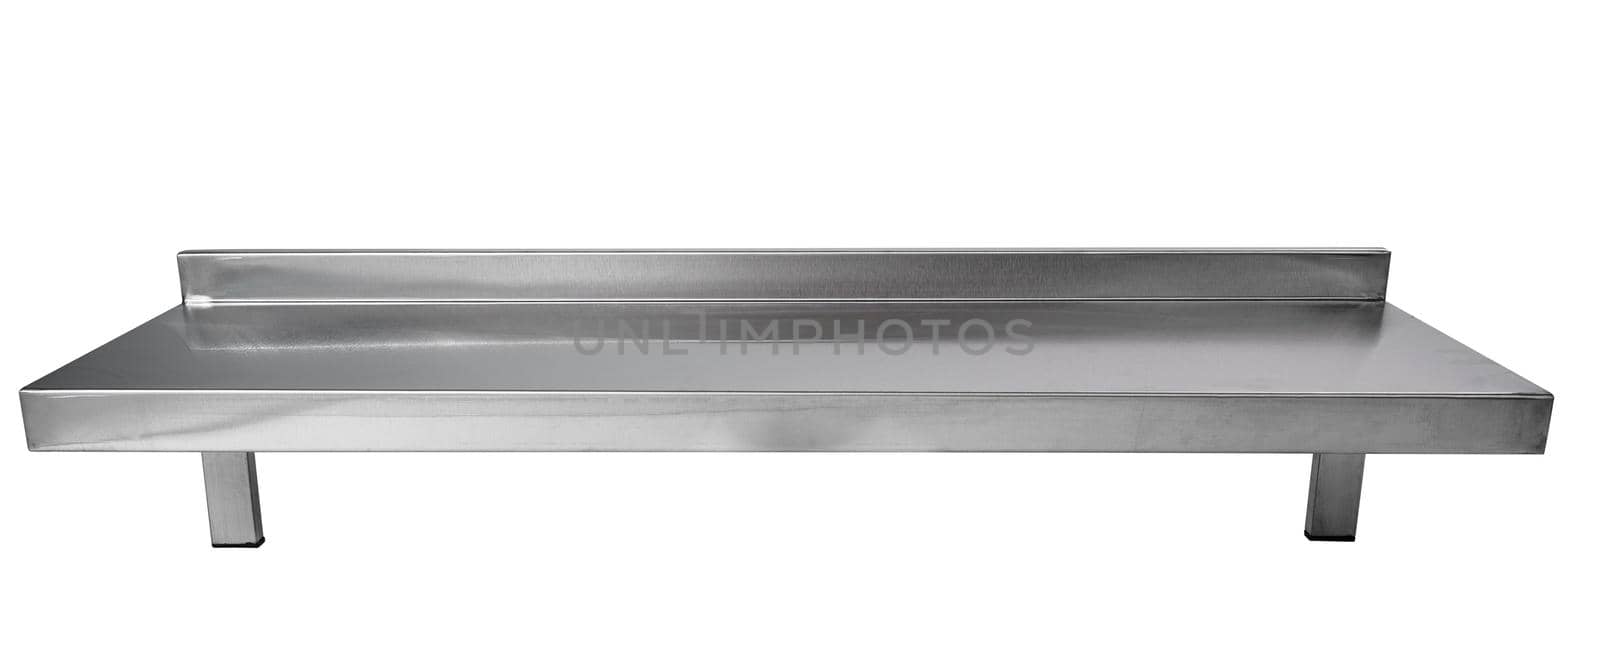 Metal industrial kitchen shelf of stainless steel isolated on white by Fabrikasimf